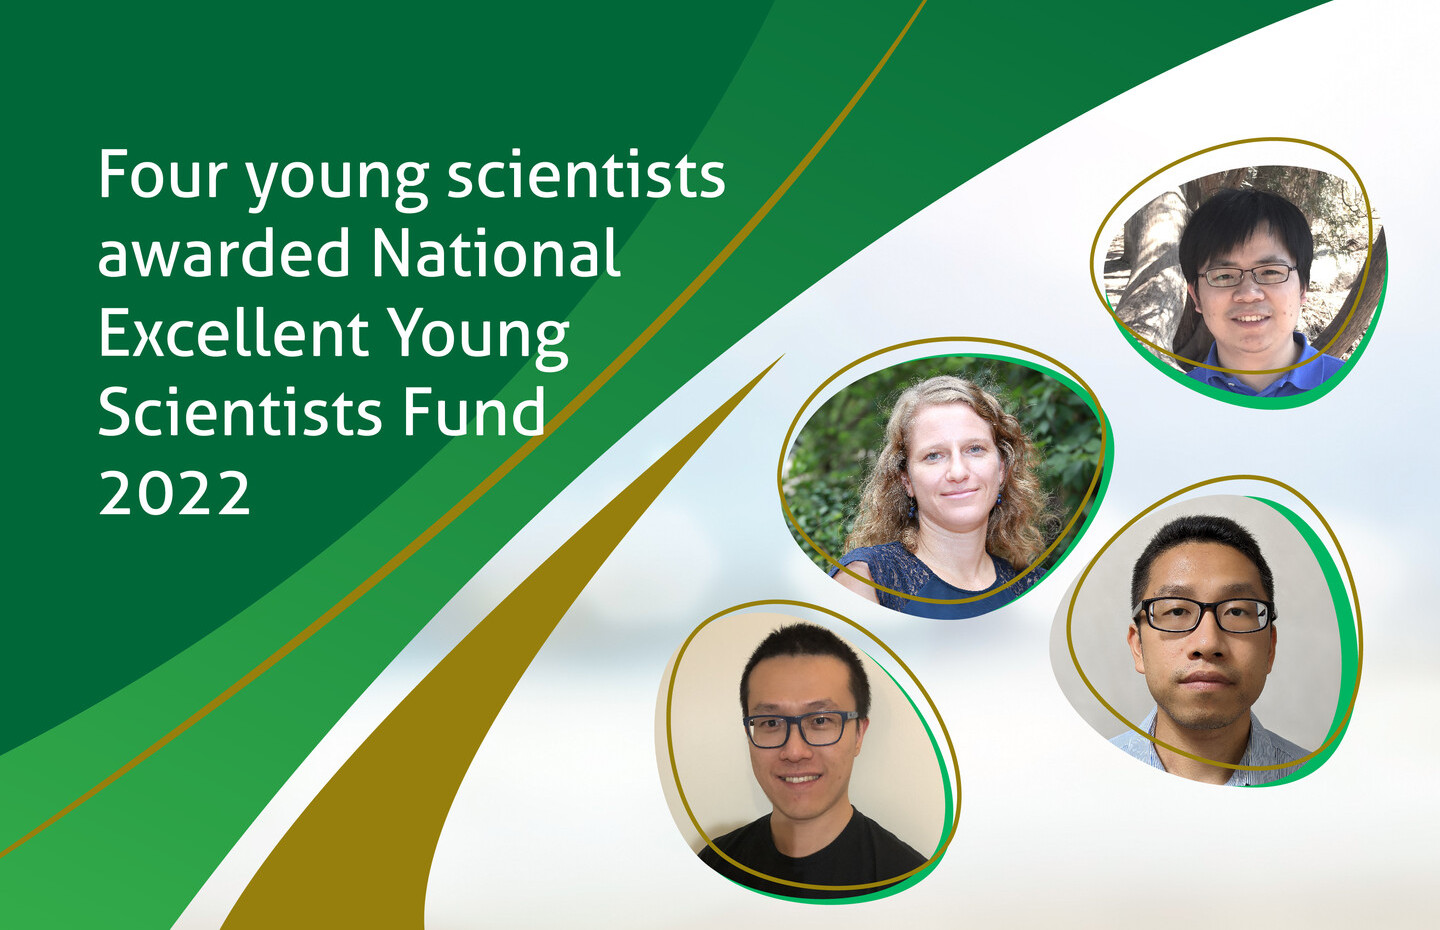 Four young scientists awarded the National Excellent Young Scientists Fund 2022